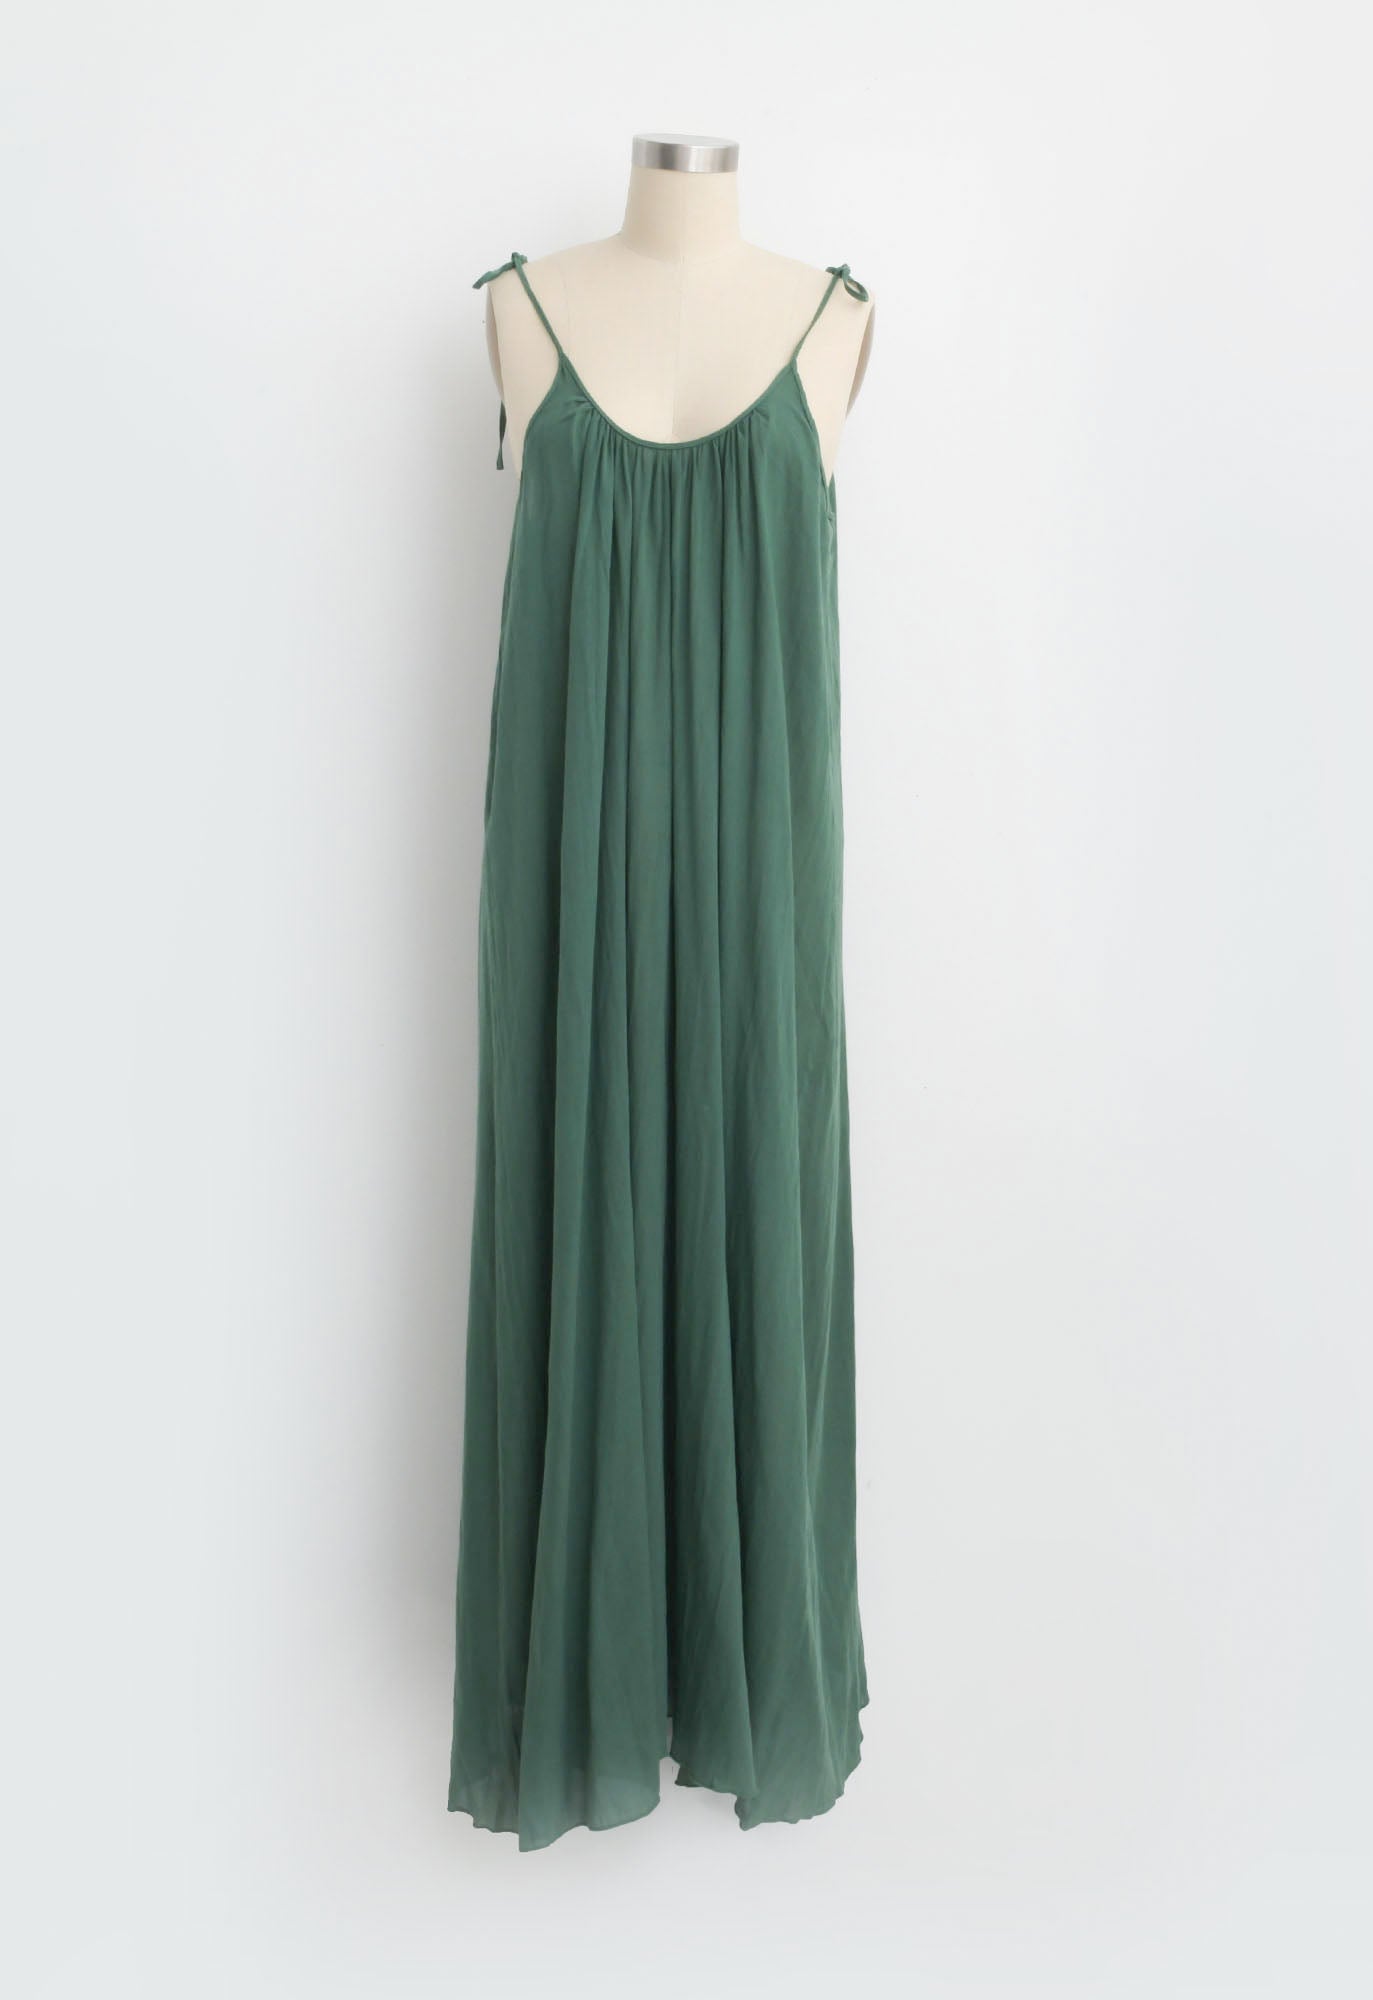 Lined Maxi Slip in Fern – Loup Charmant